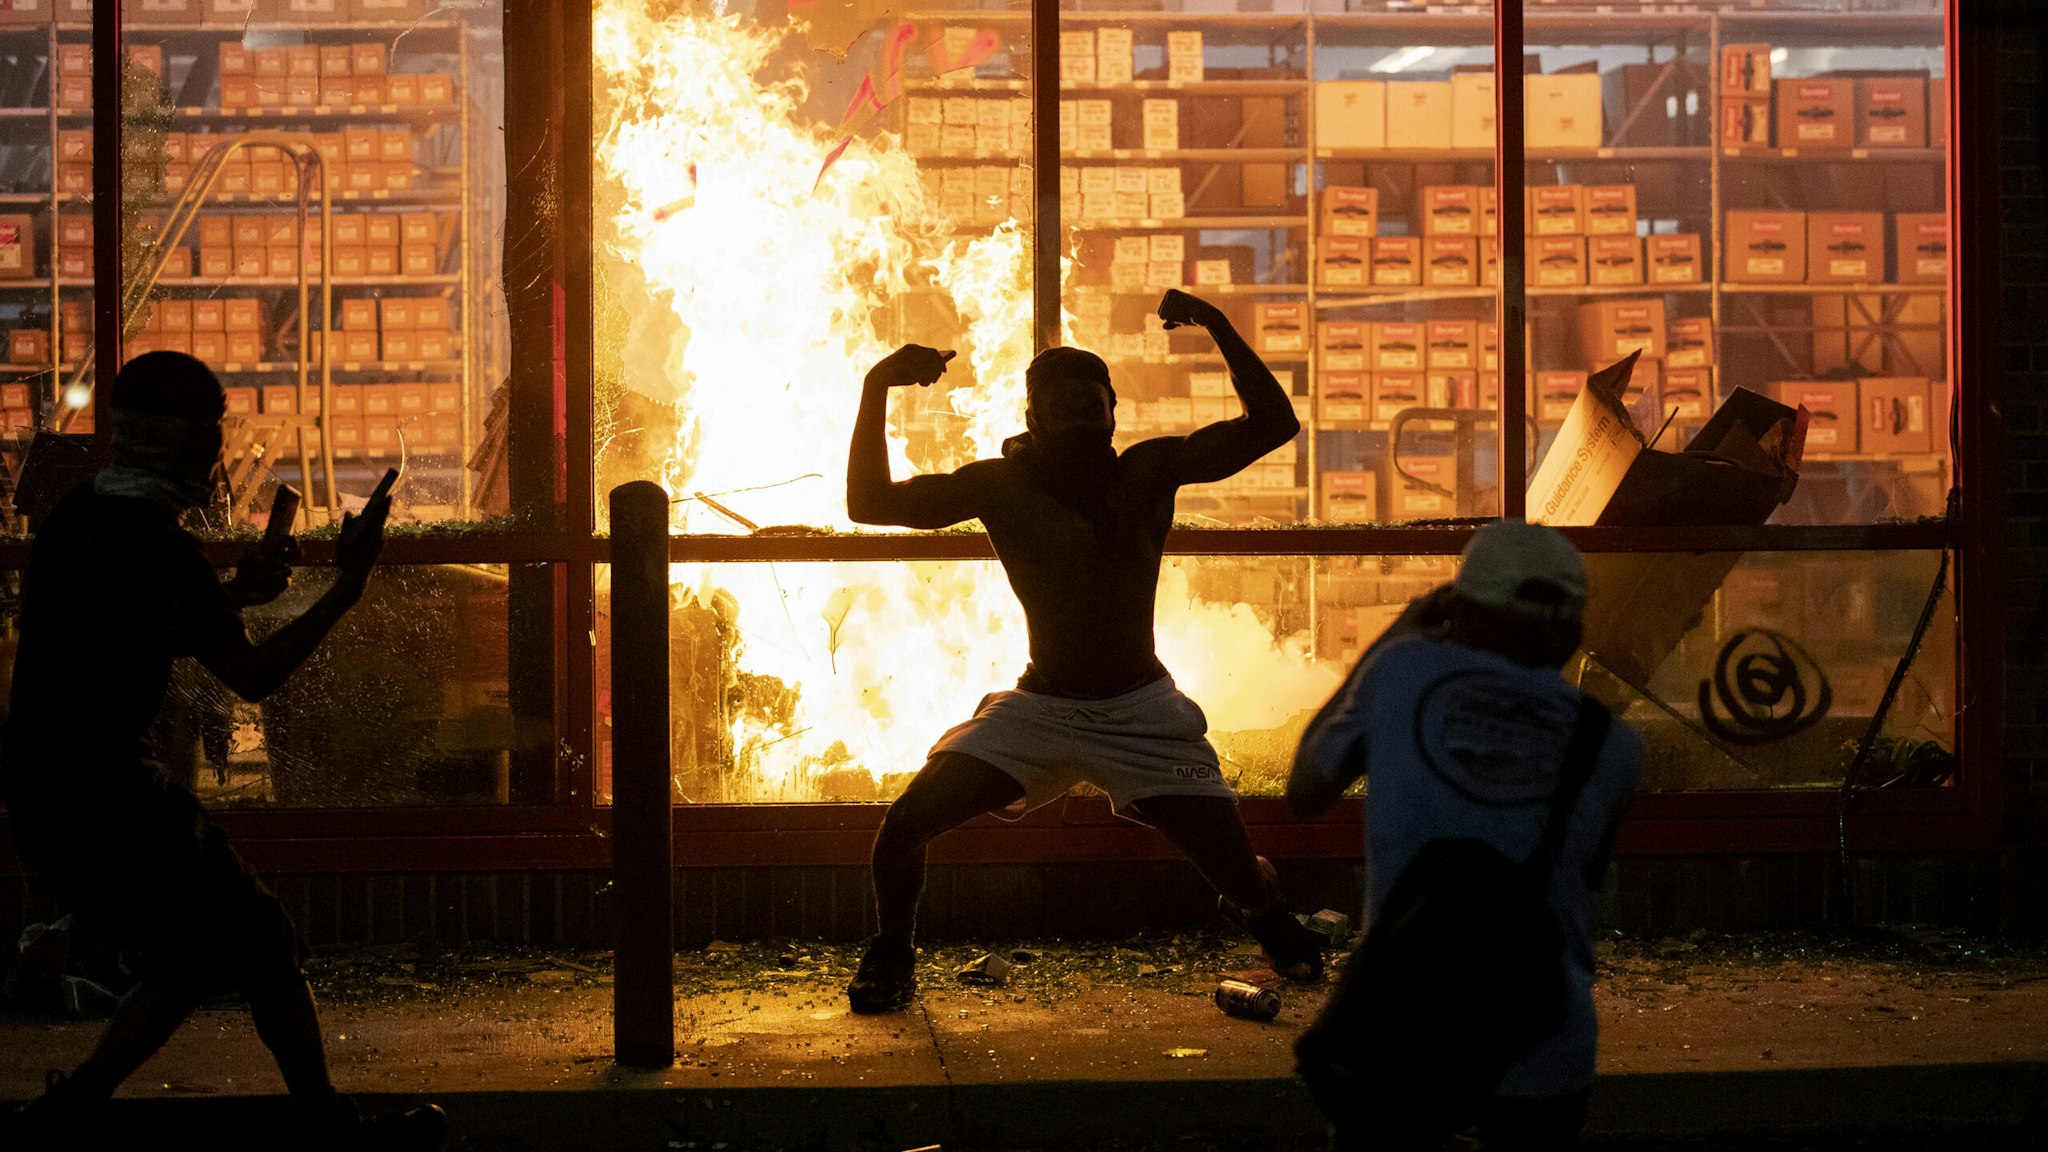 Minneapolis, MN May 27: A fire broke out in an auto parts store across from the Minneapolis police's Third Precinct station Wednesday amid a second night of protest.